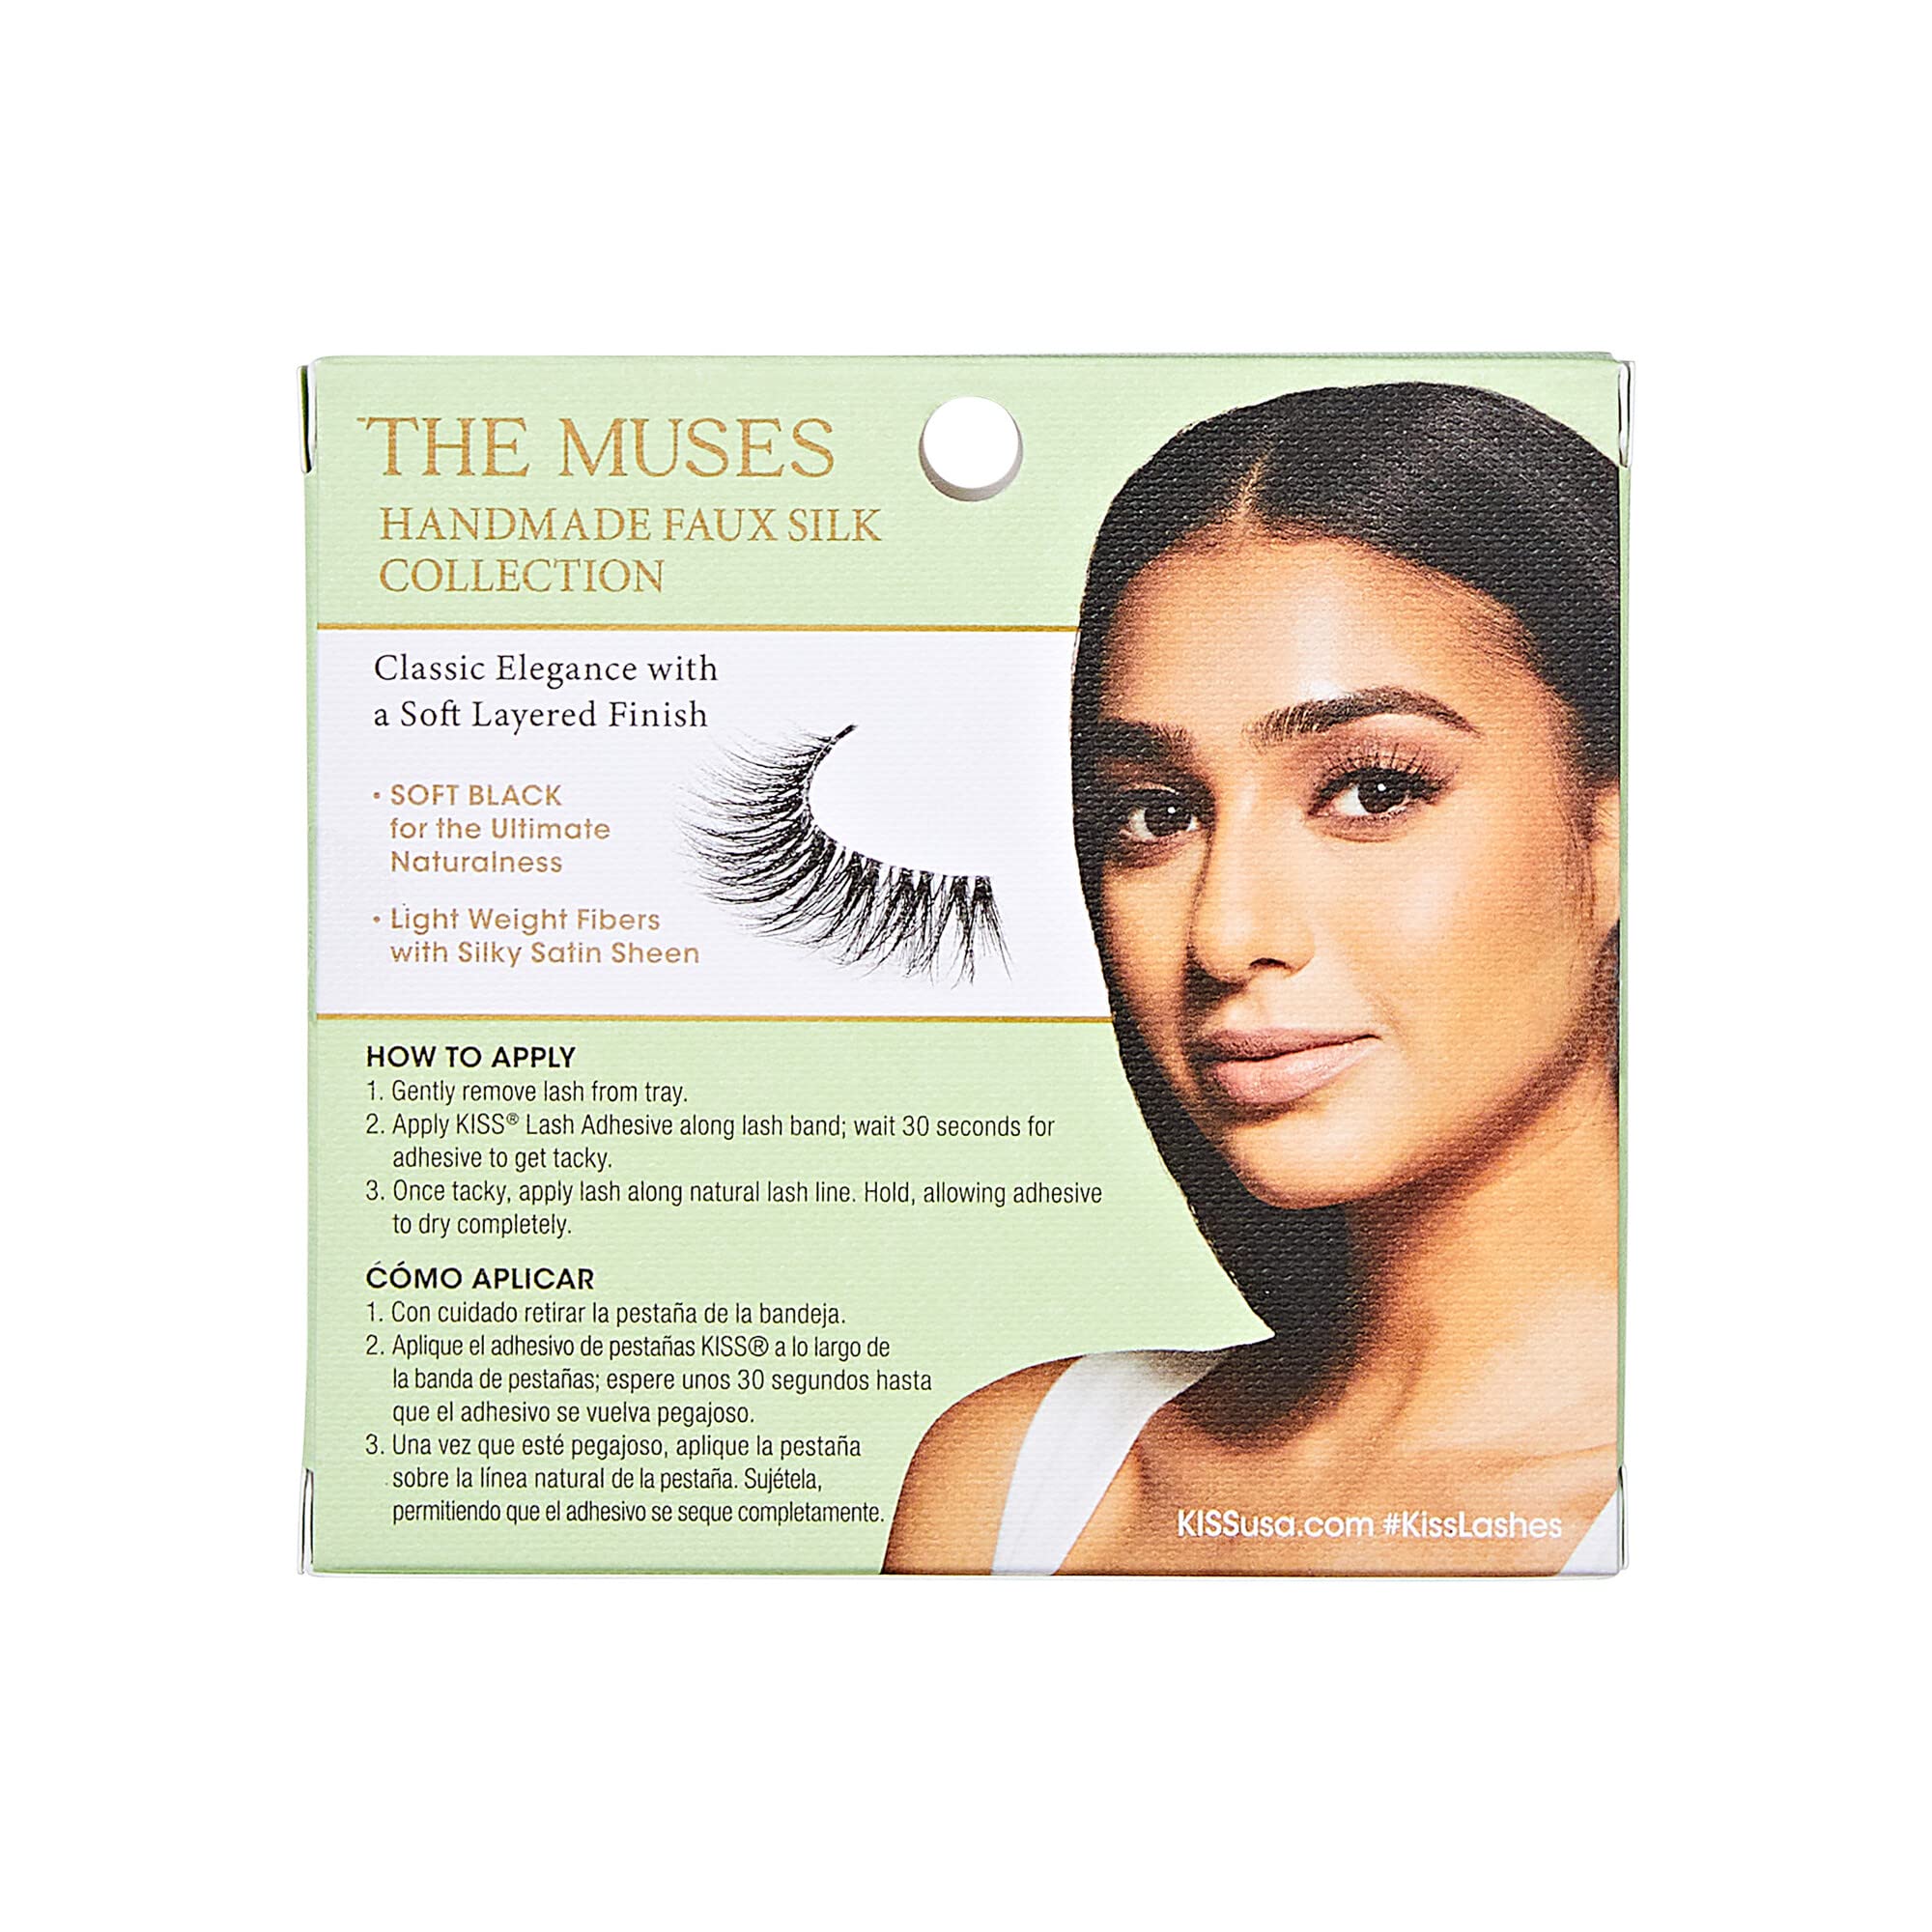 KISS Lash Couture The Muses Collection False Eyelashes - Empress, Black, Rounded, Doe-Eyed, Refined Faux Silk, Contact Lens Friendly, Pliable Band, Comfortable, Reusable, Cruelty Free, Vegan | 1 Pair